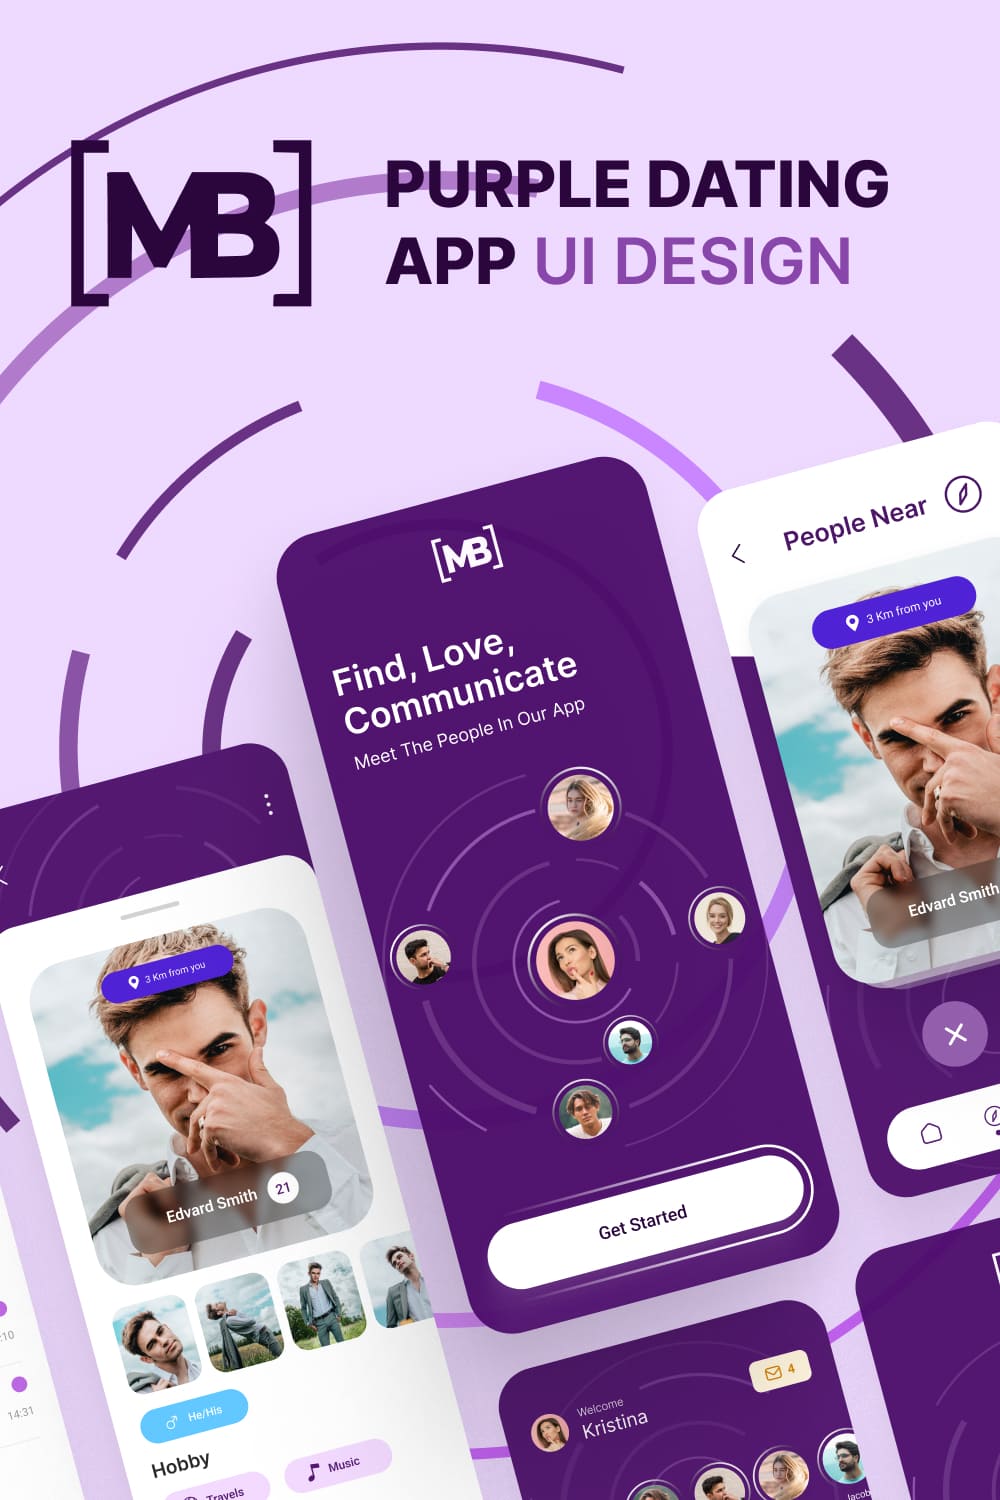 Purple dating template for cool app.